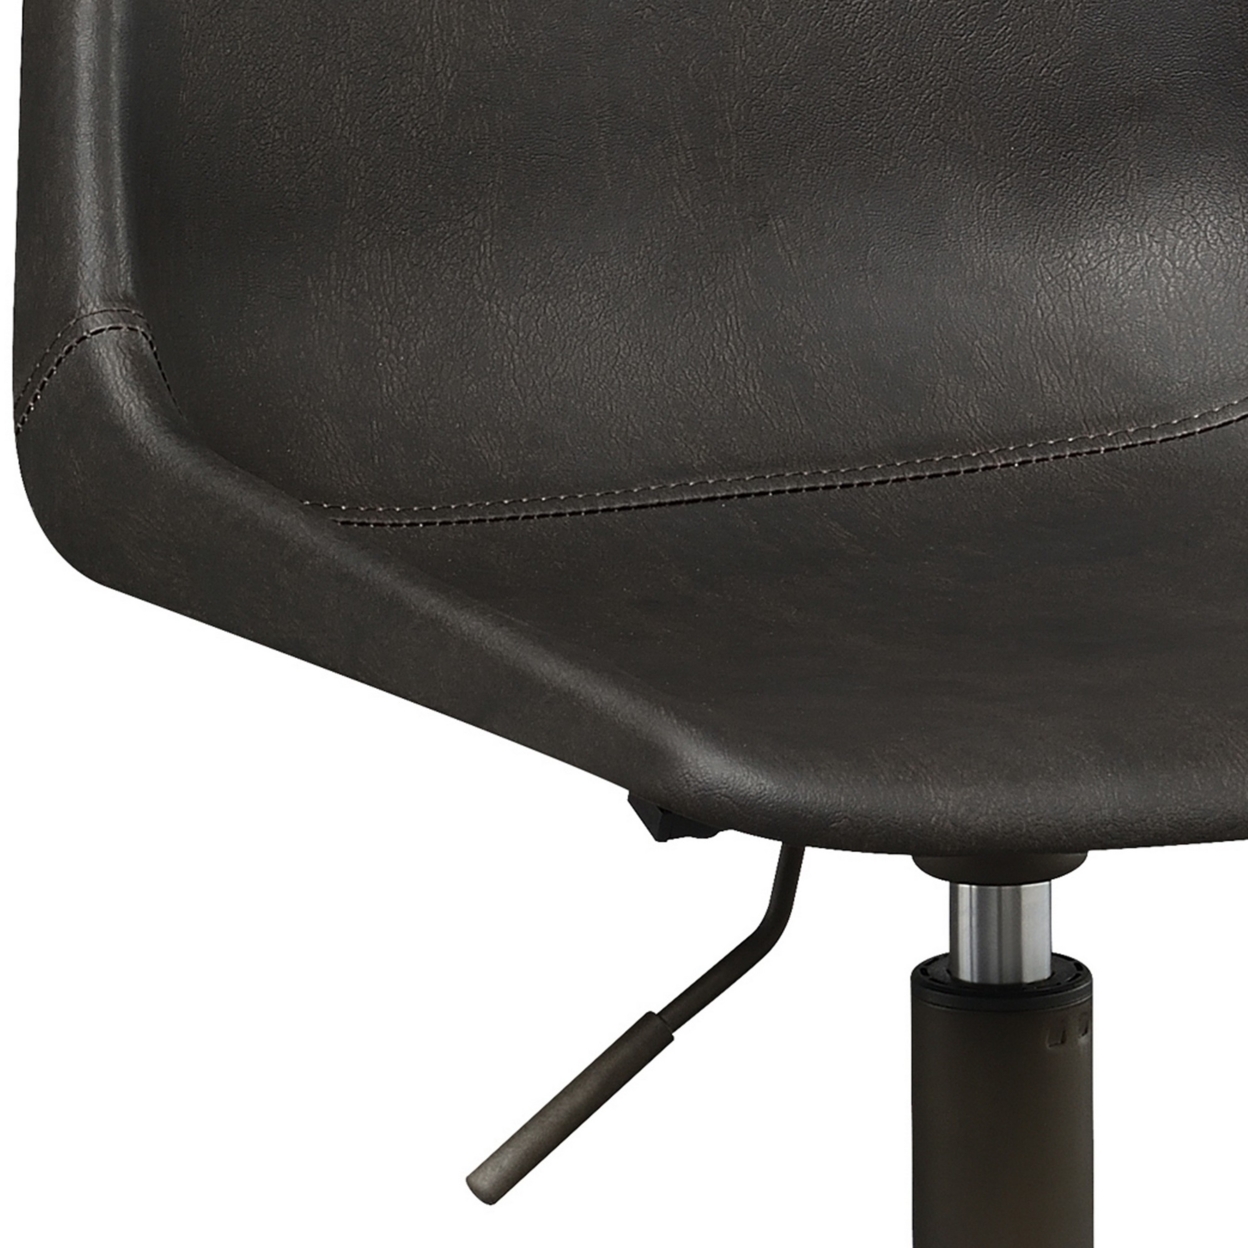 Fabric Office Chair With Curved Back And Contrast Stitching, Brown- Saltoro Sherpi